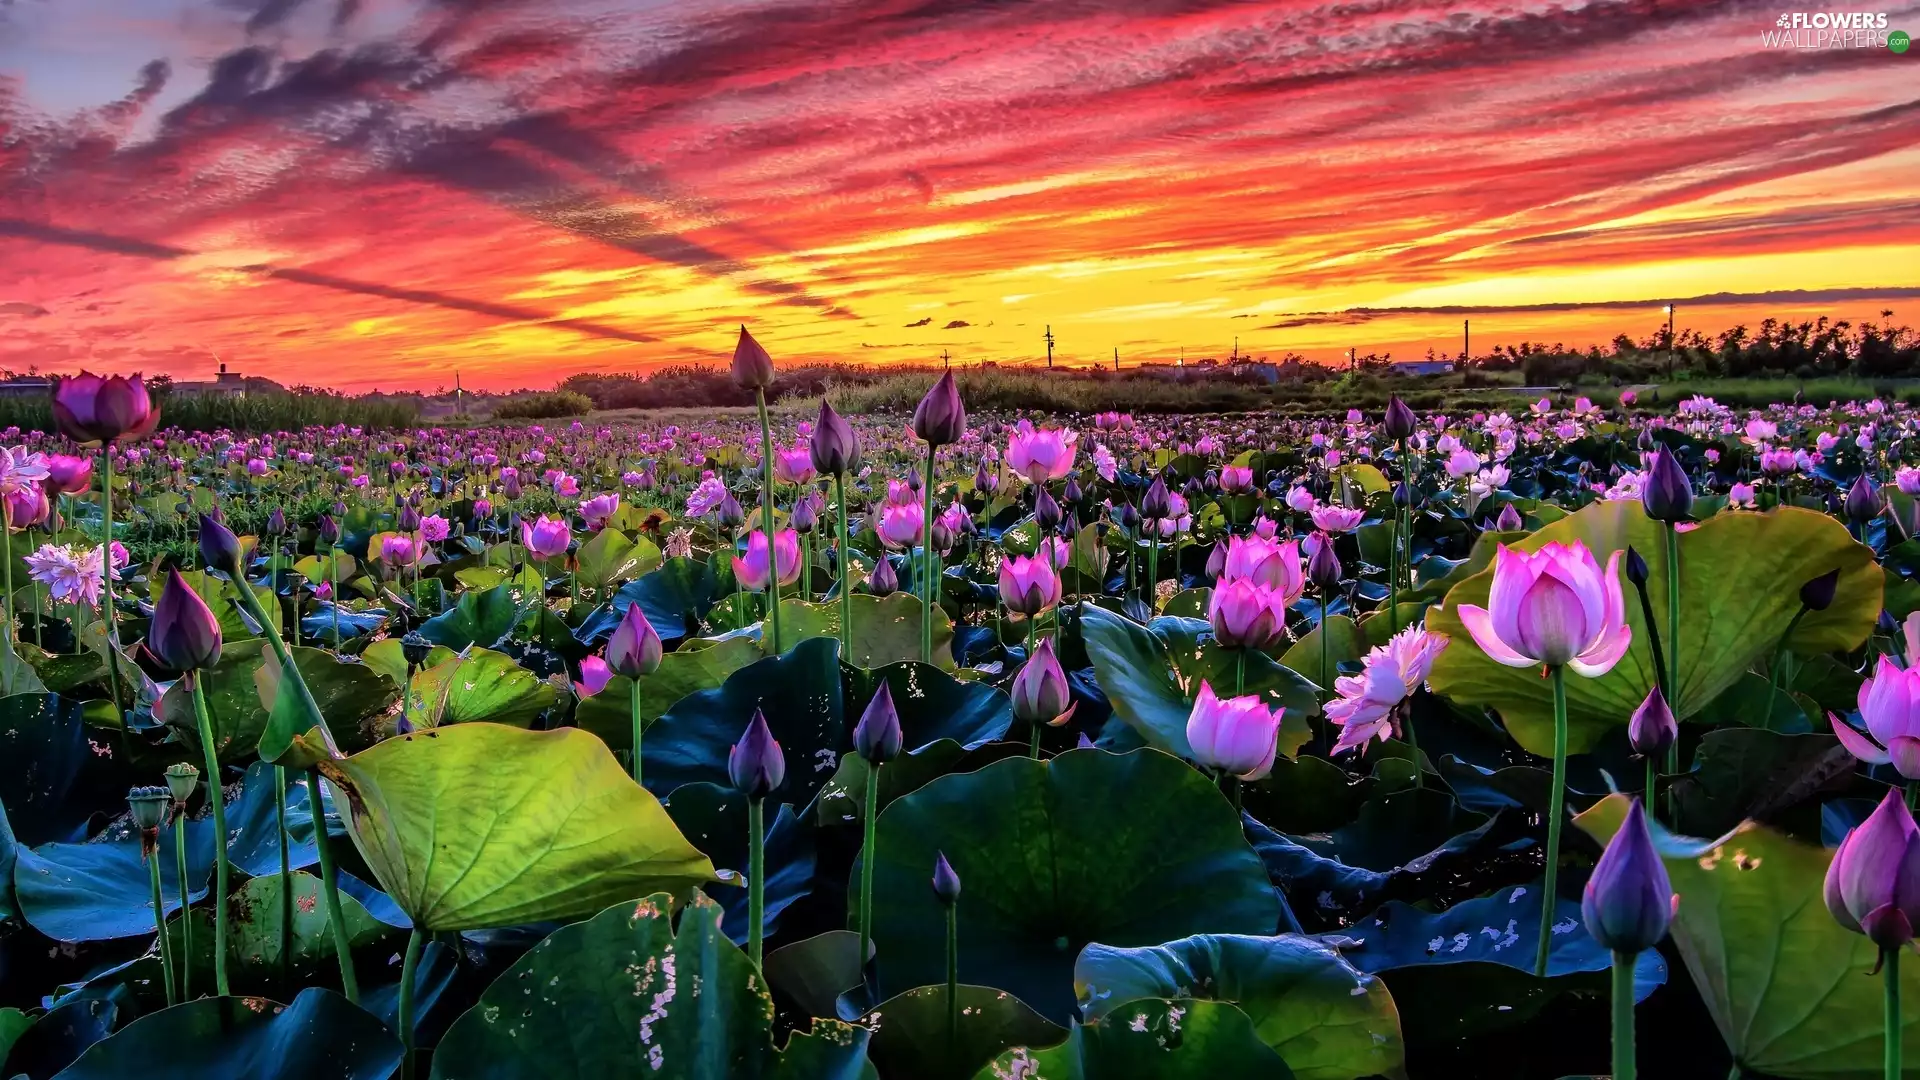 clouds, Great Sunsets, lotuses, Sky, Flowers